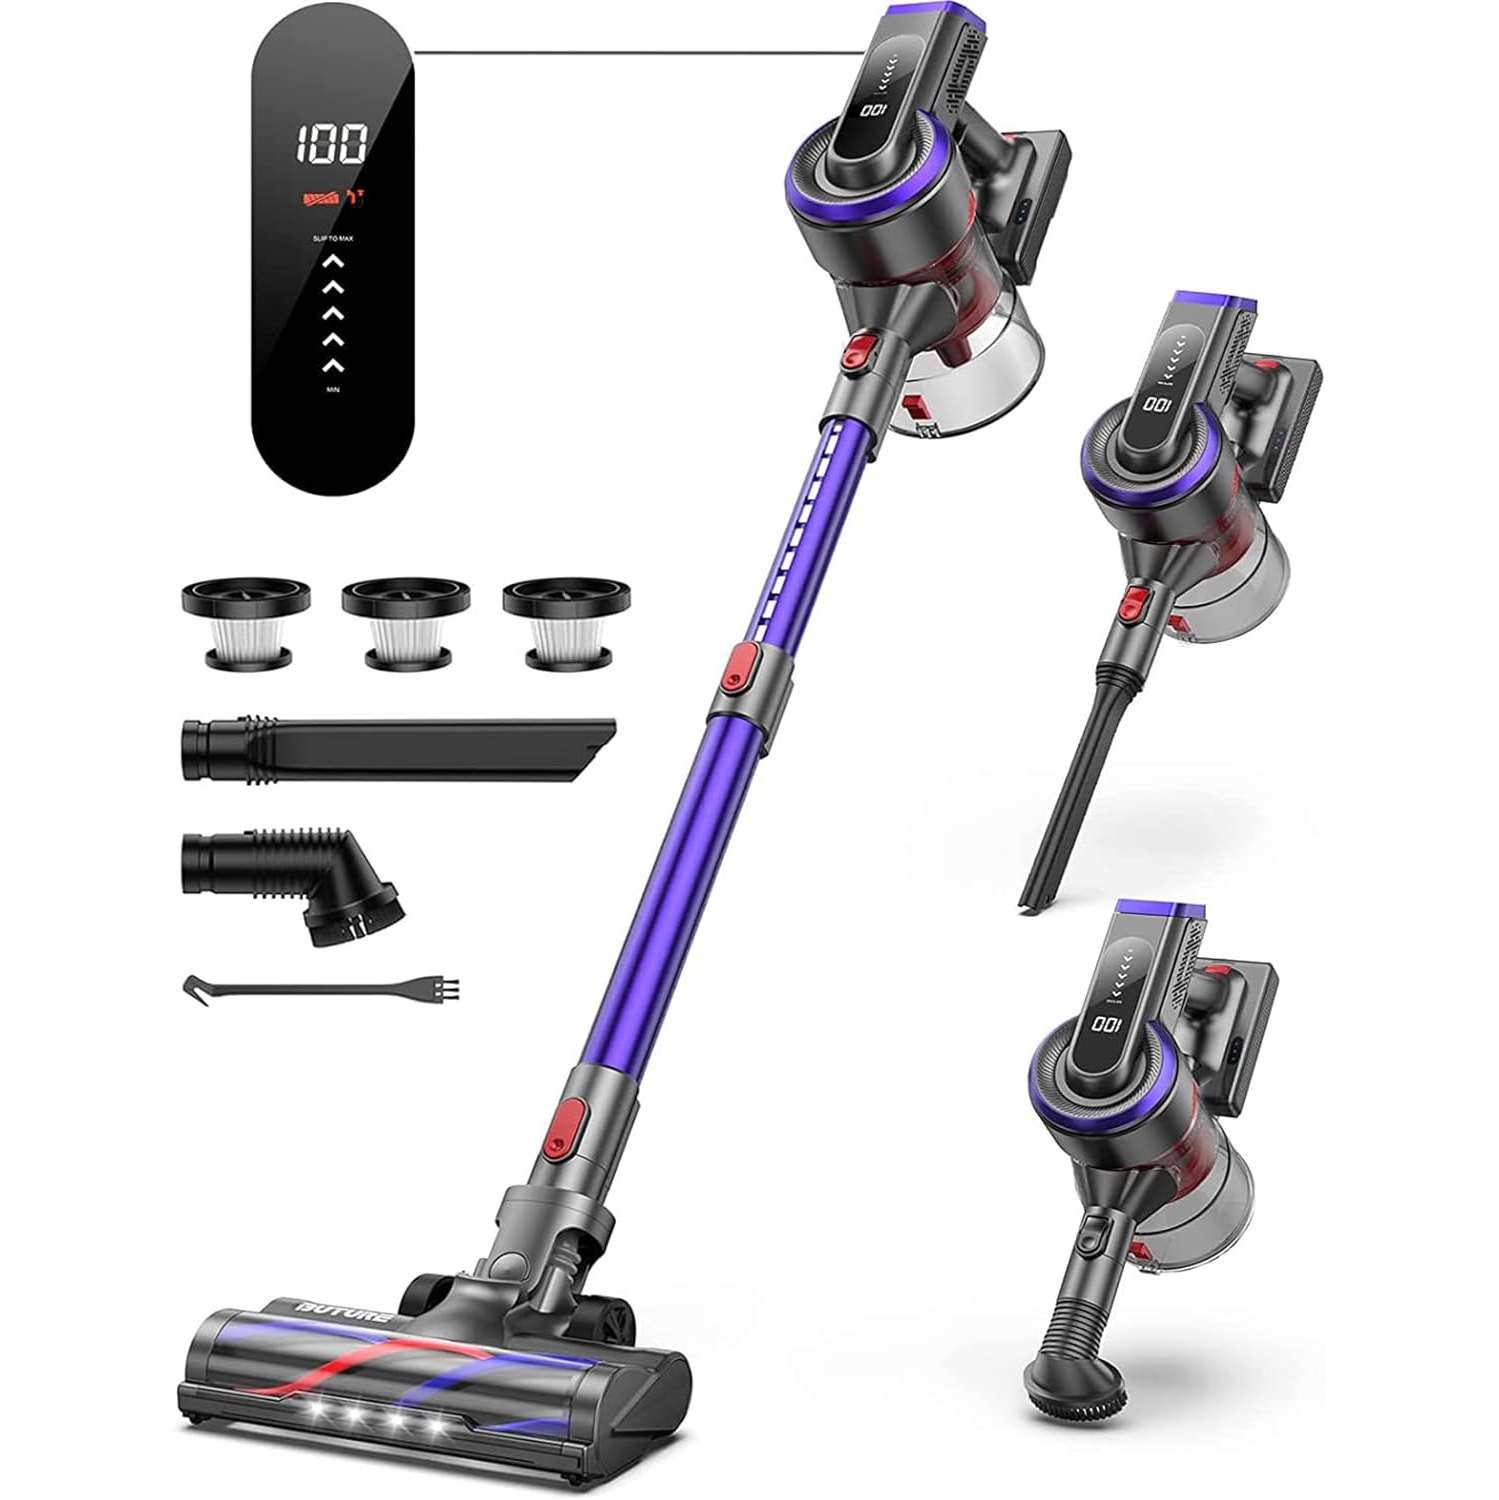 BuTure Cordless Vacuum Cleaner, JR400 Wireless Vacuum Cleaner with Touch Display, 33000Pa/400W, up to 55 Min, LED Electric Brush, for Hard Floors, Carpet, Pet Hair